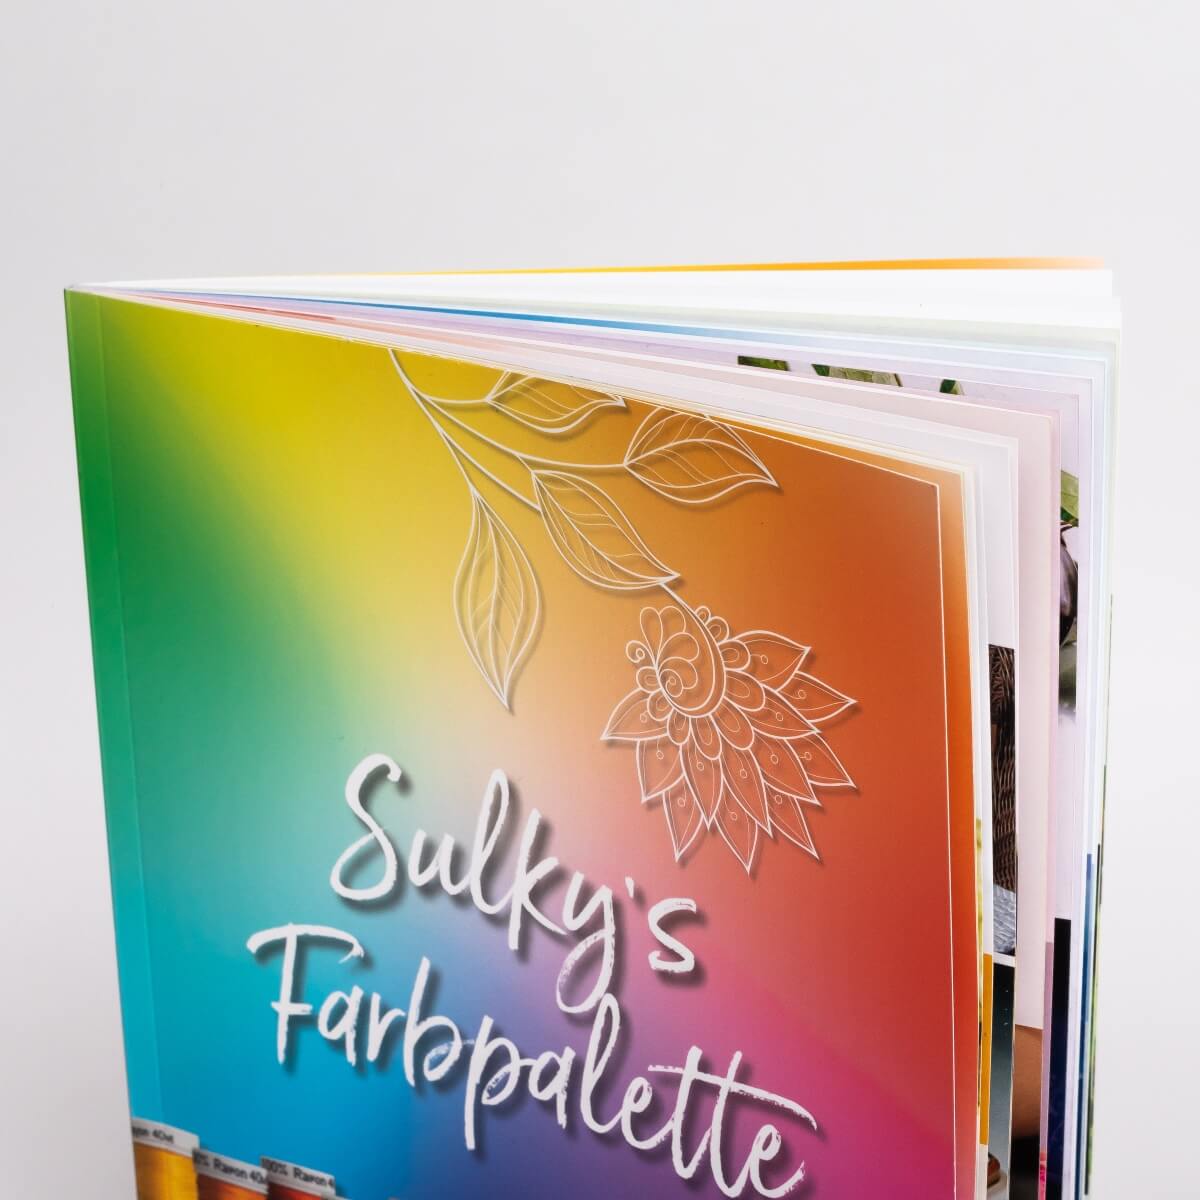 SULKY´s Farbpalette - 60 pages booklet (in german)